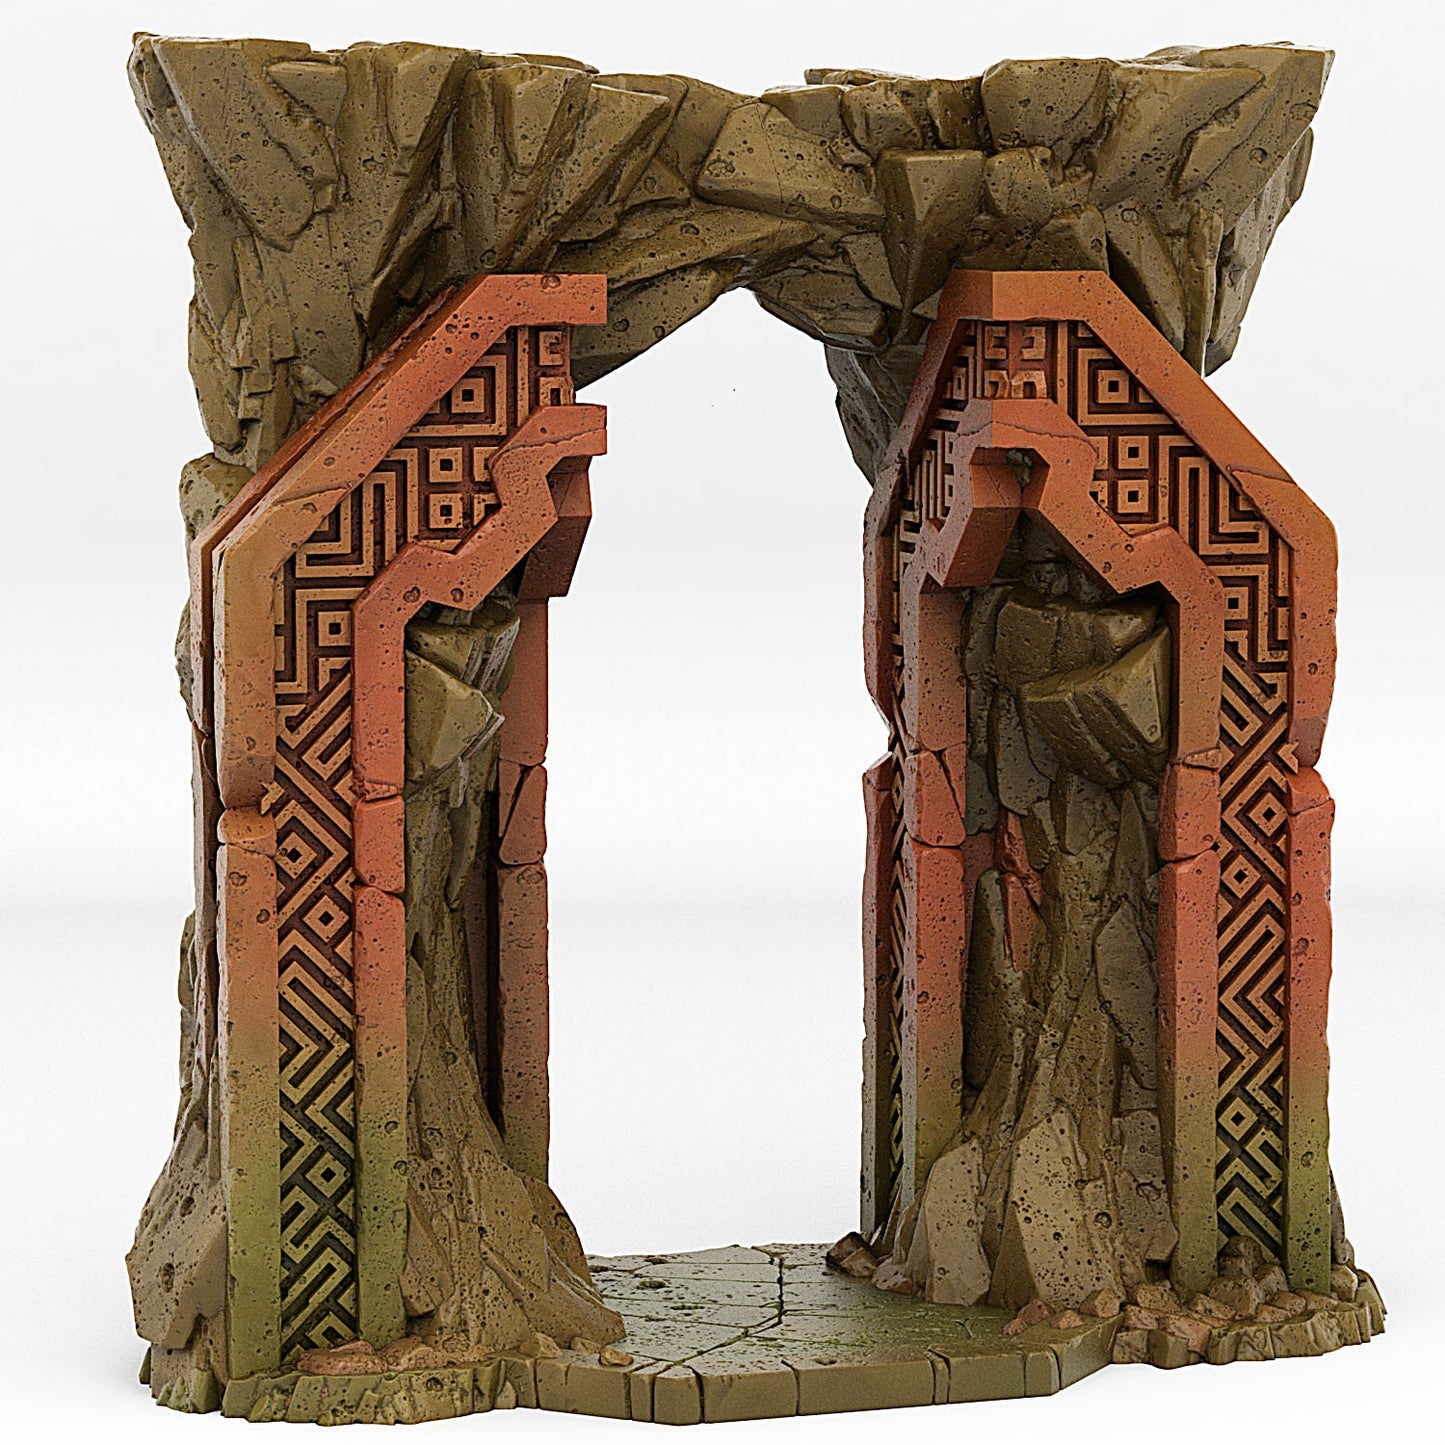 Dwarf Portal | Scenery and terrain | 3D Printed Resin Miniature | Tabletop Role Playing | AoS | D&D | 40K | Pathfinder